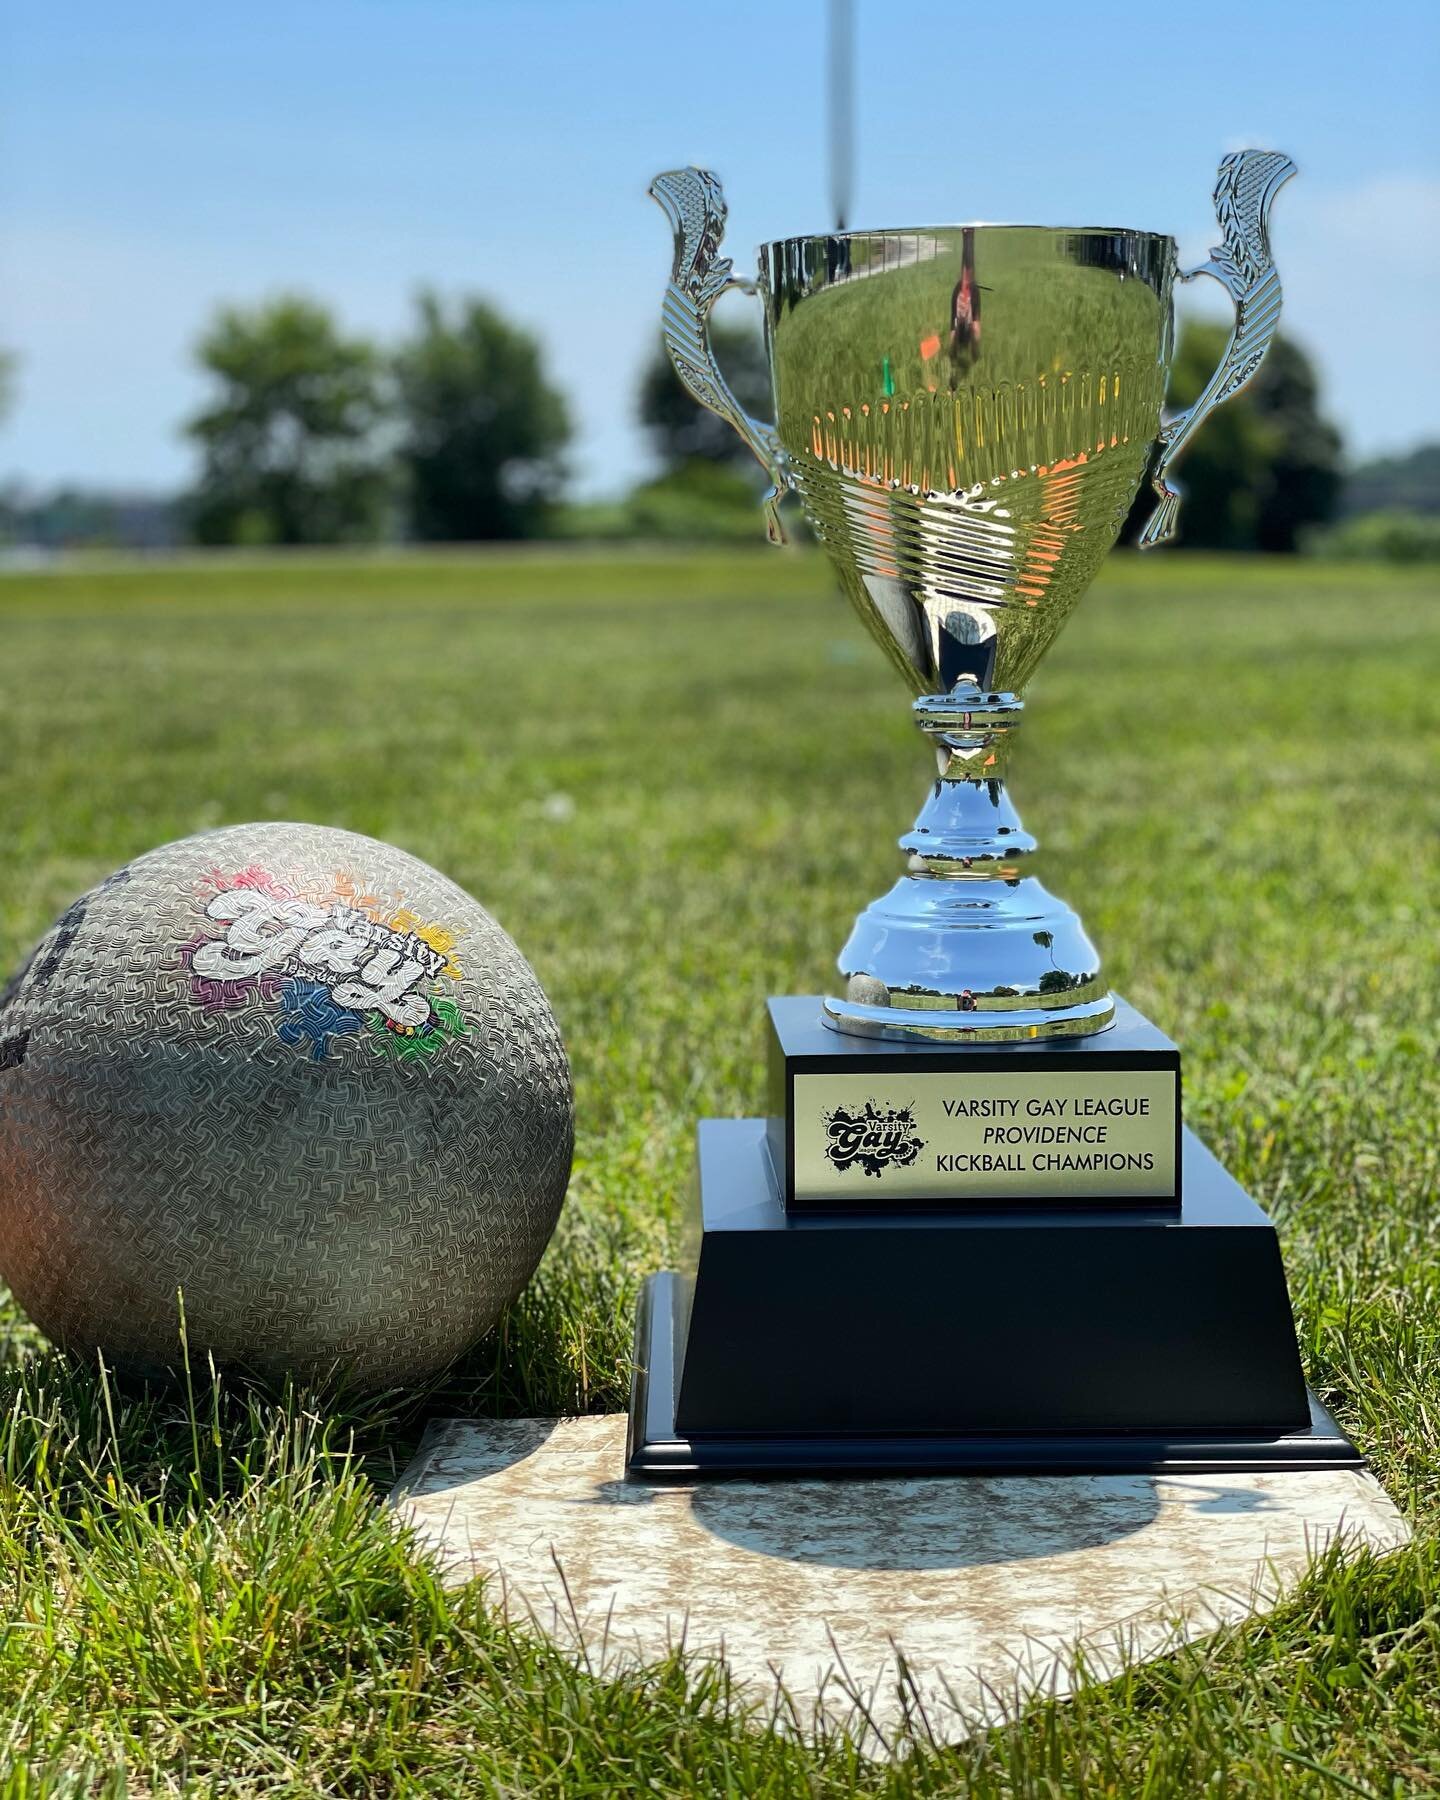 Who&rsquo;s gonna take the trophy?! #vglpvd #gaykickball #varsitygayleague #providence #pride #playoffs